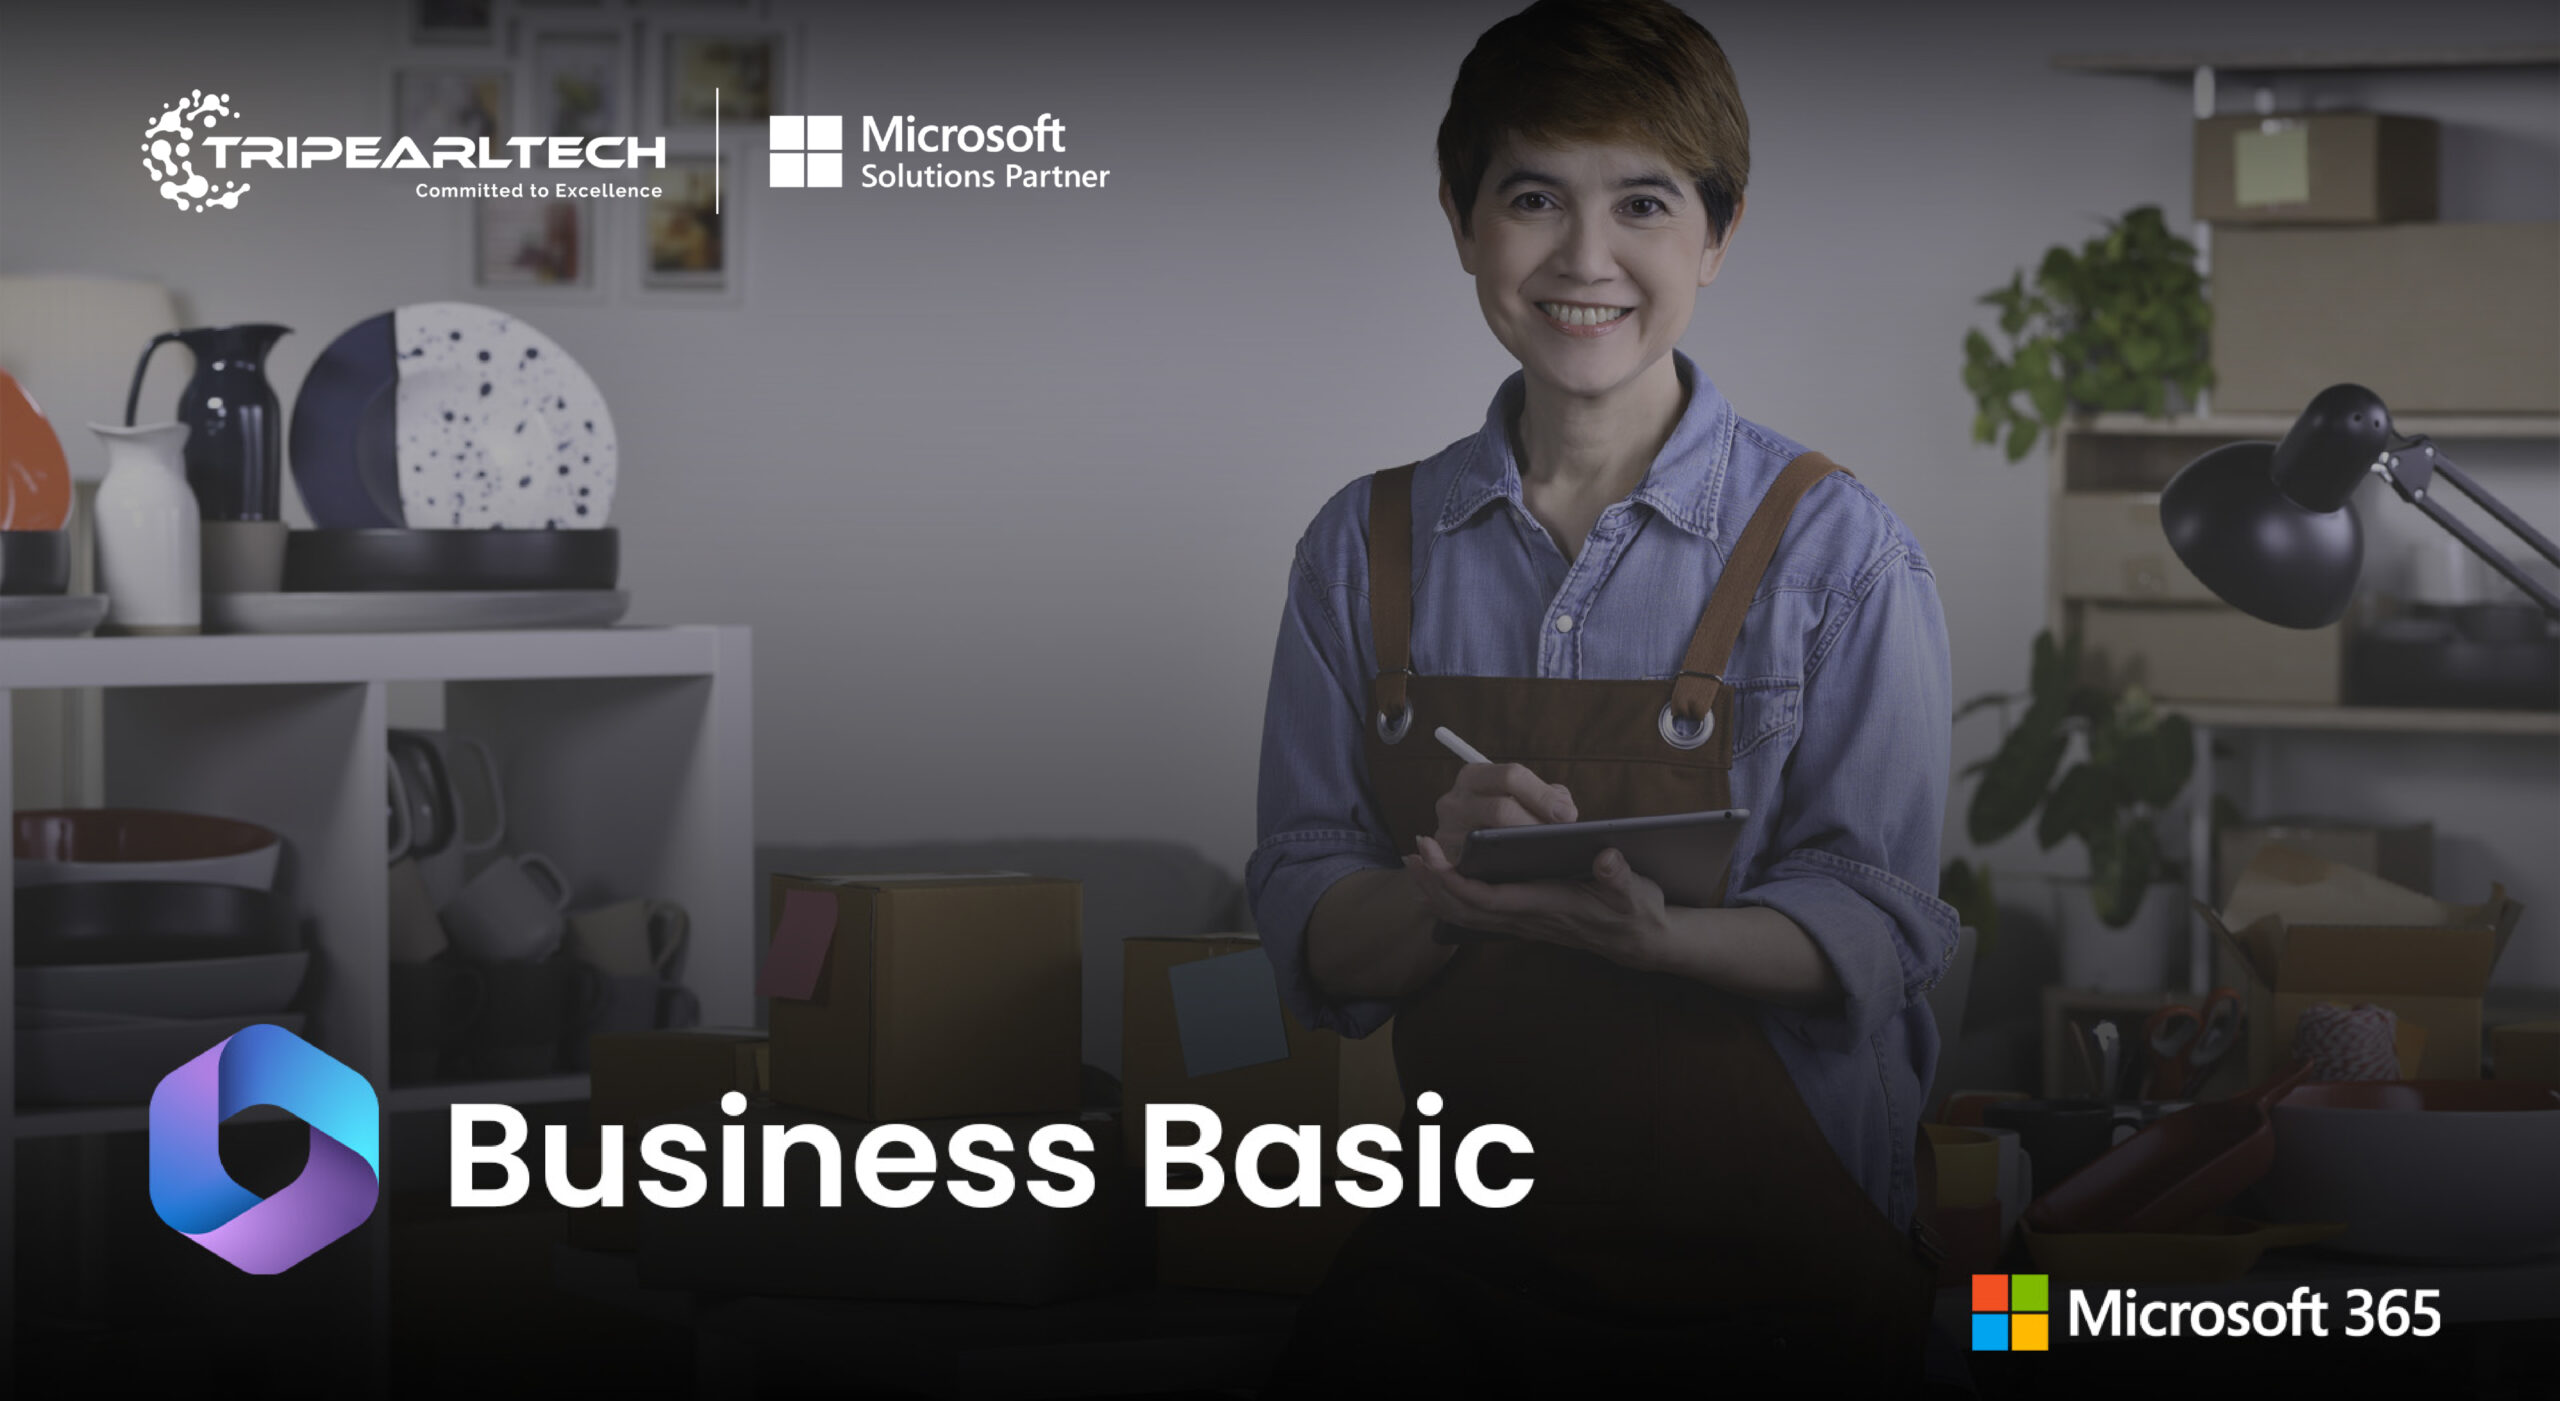 Microsoft 365 Business Basics for small businesses